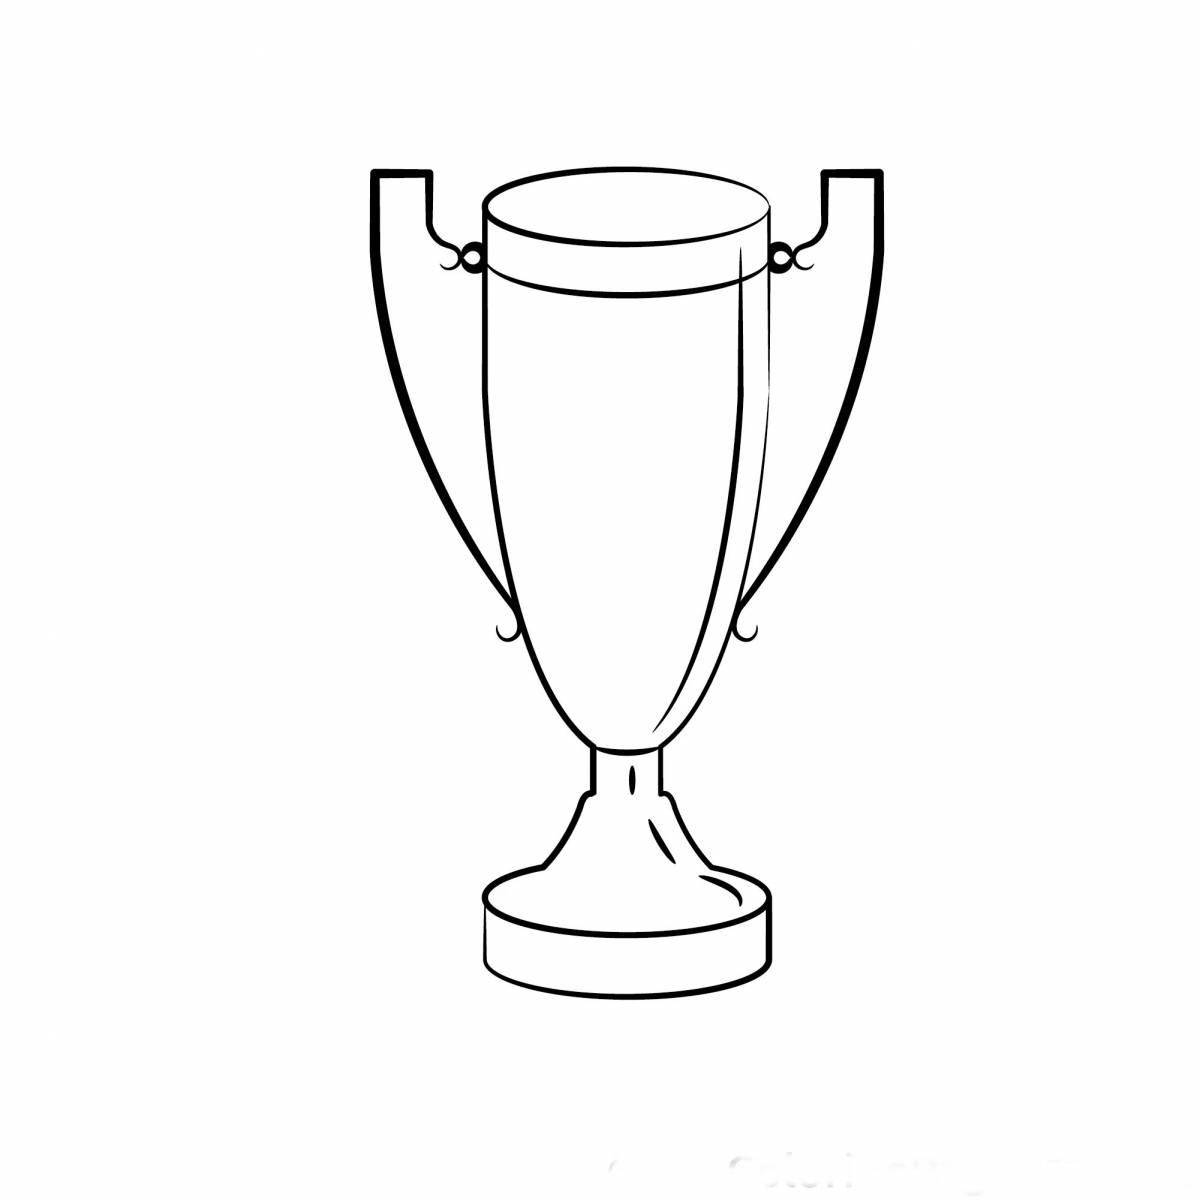 Rampant football cup coloring page